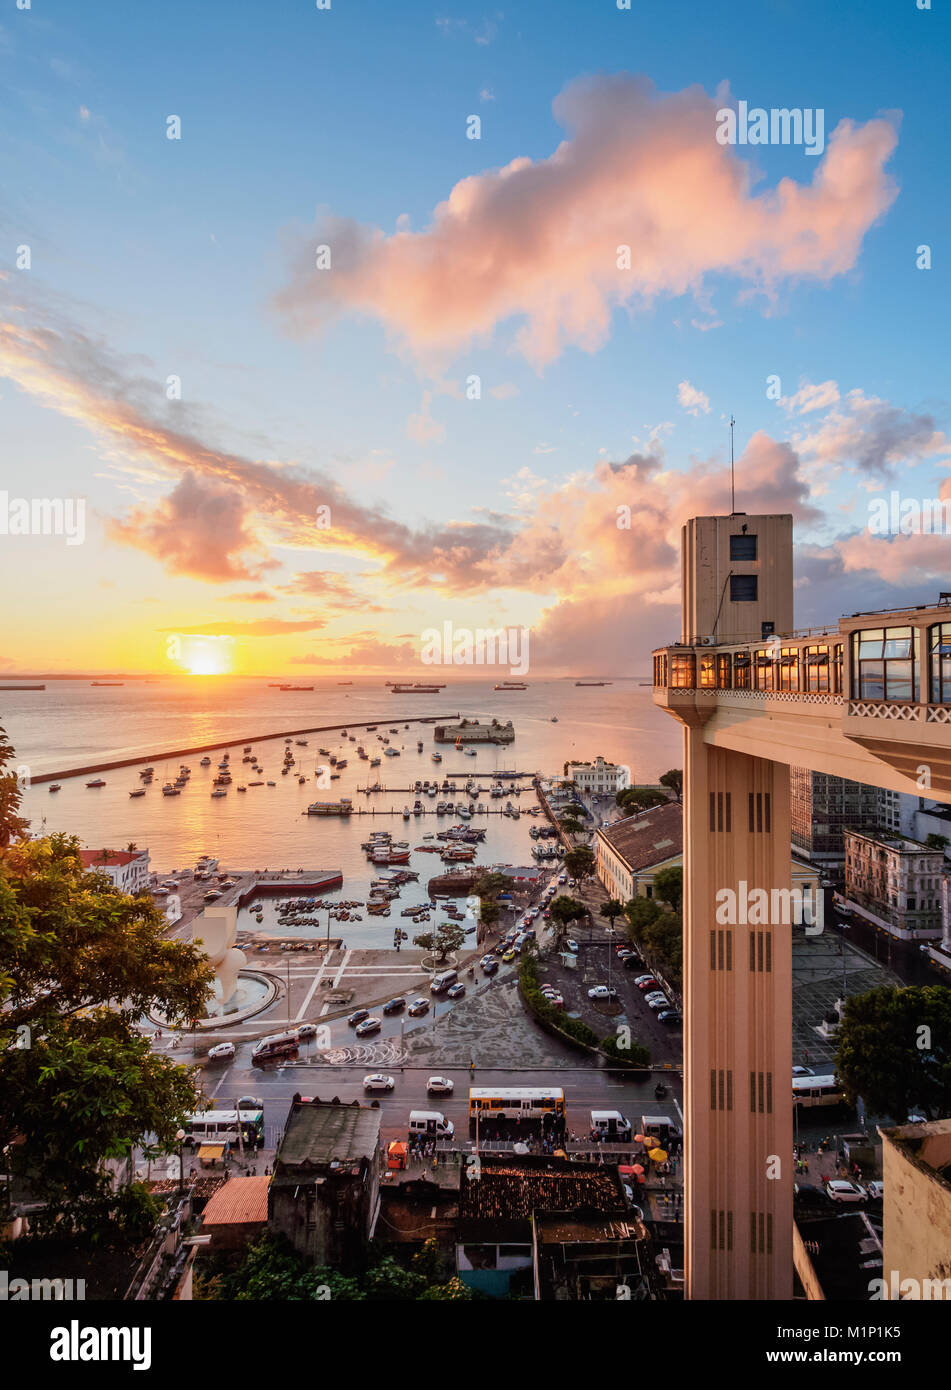 Lacerda Elevator at sunset, Salvador, State of Bahia, Brazil, South America Stock Photo